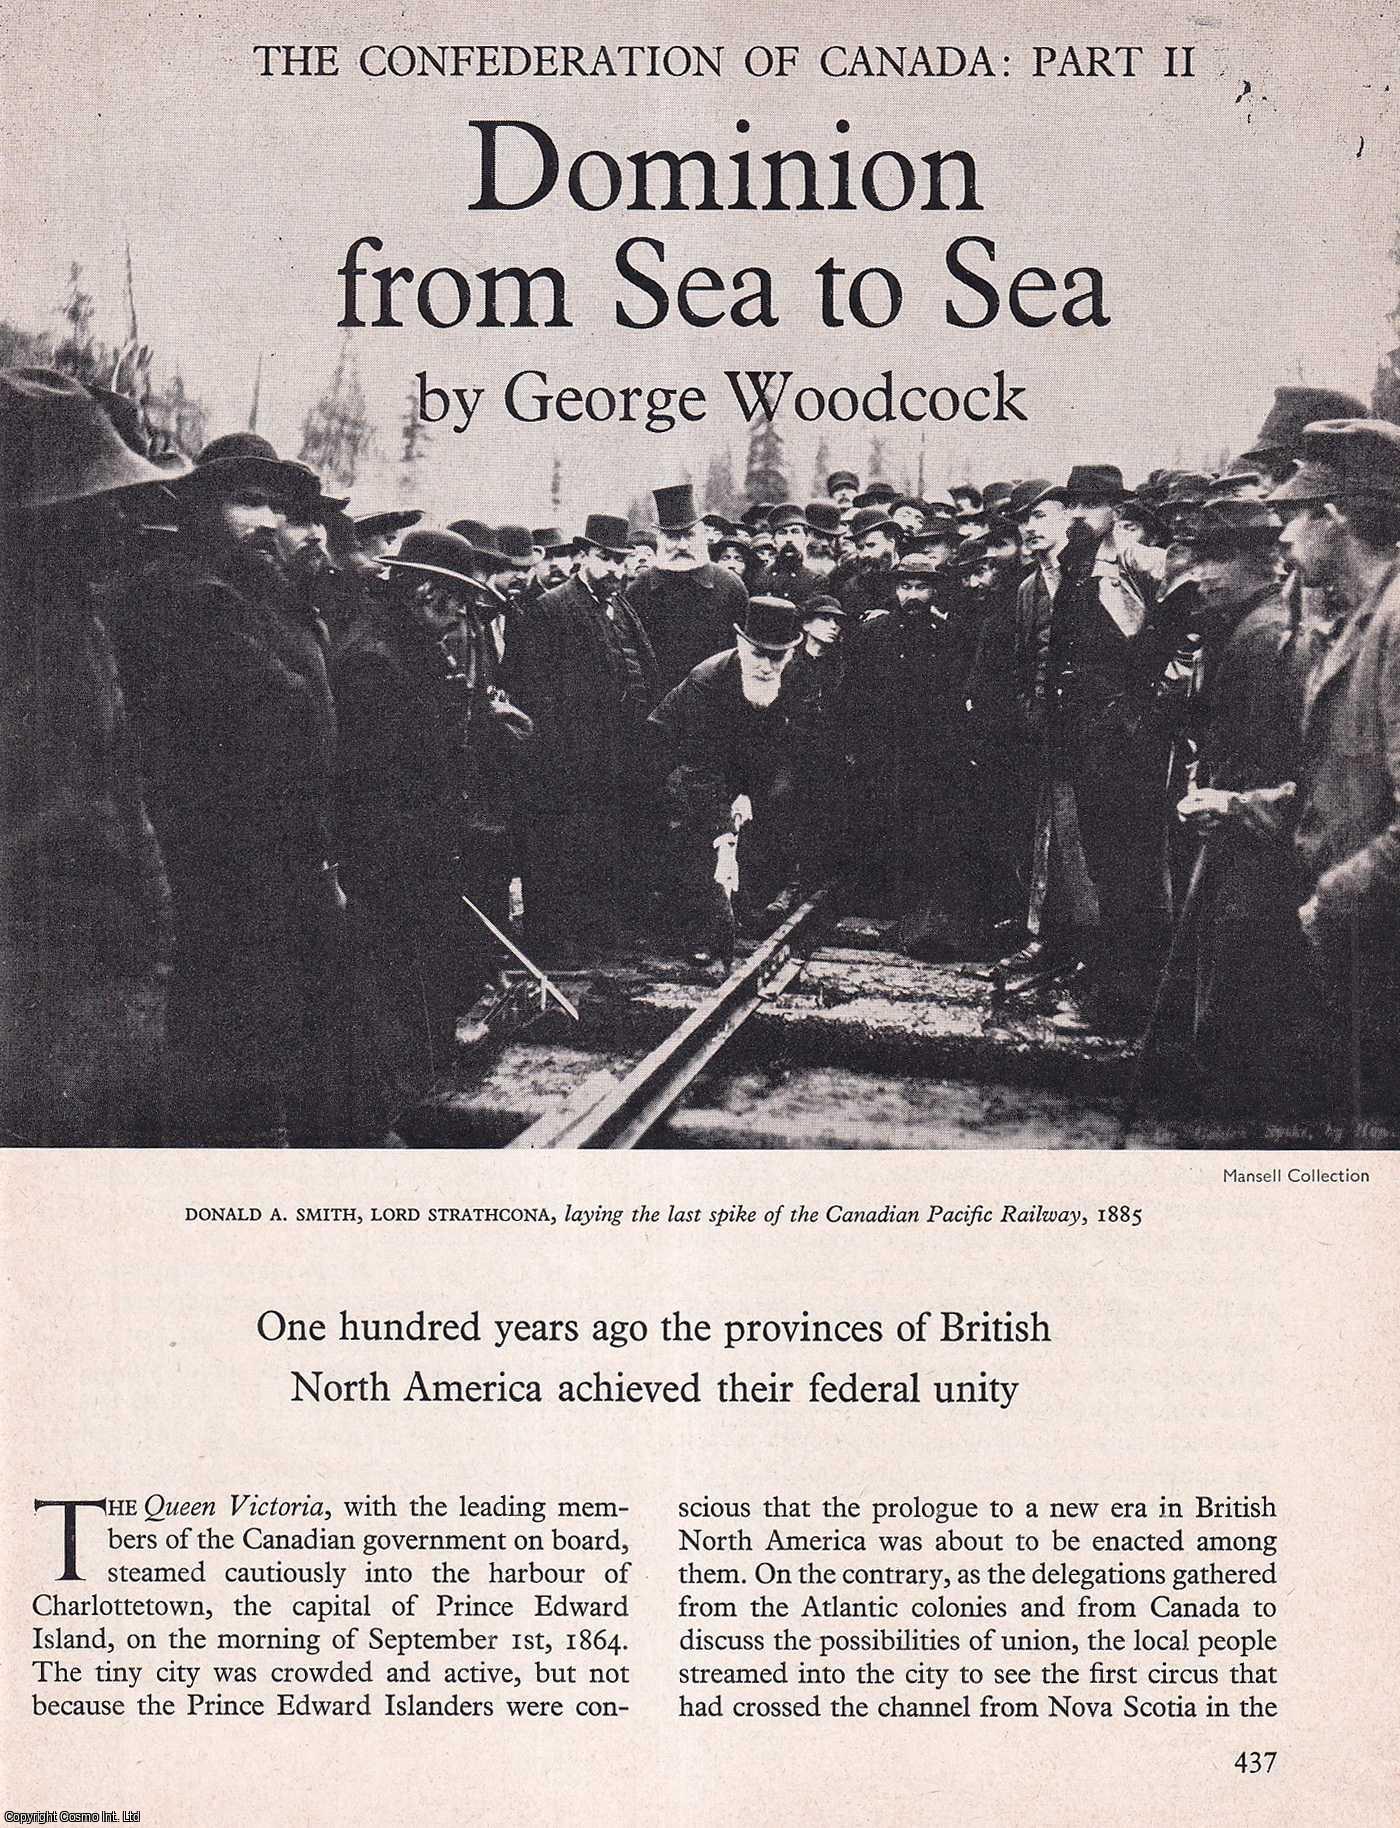 George Woodcock - Dominion from Sea to Sea: The Confederation of Canada. Part 2. An original article from History Today magazine, 1967.